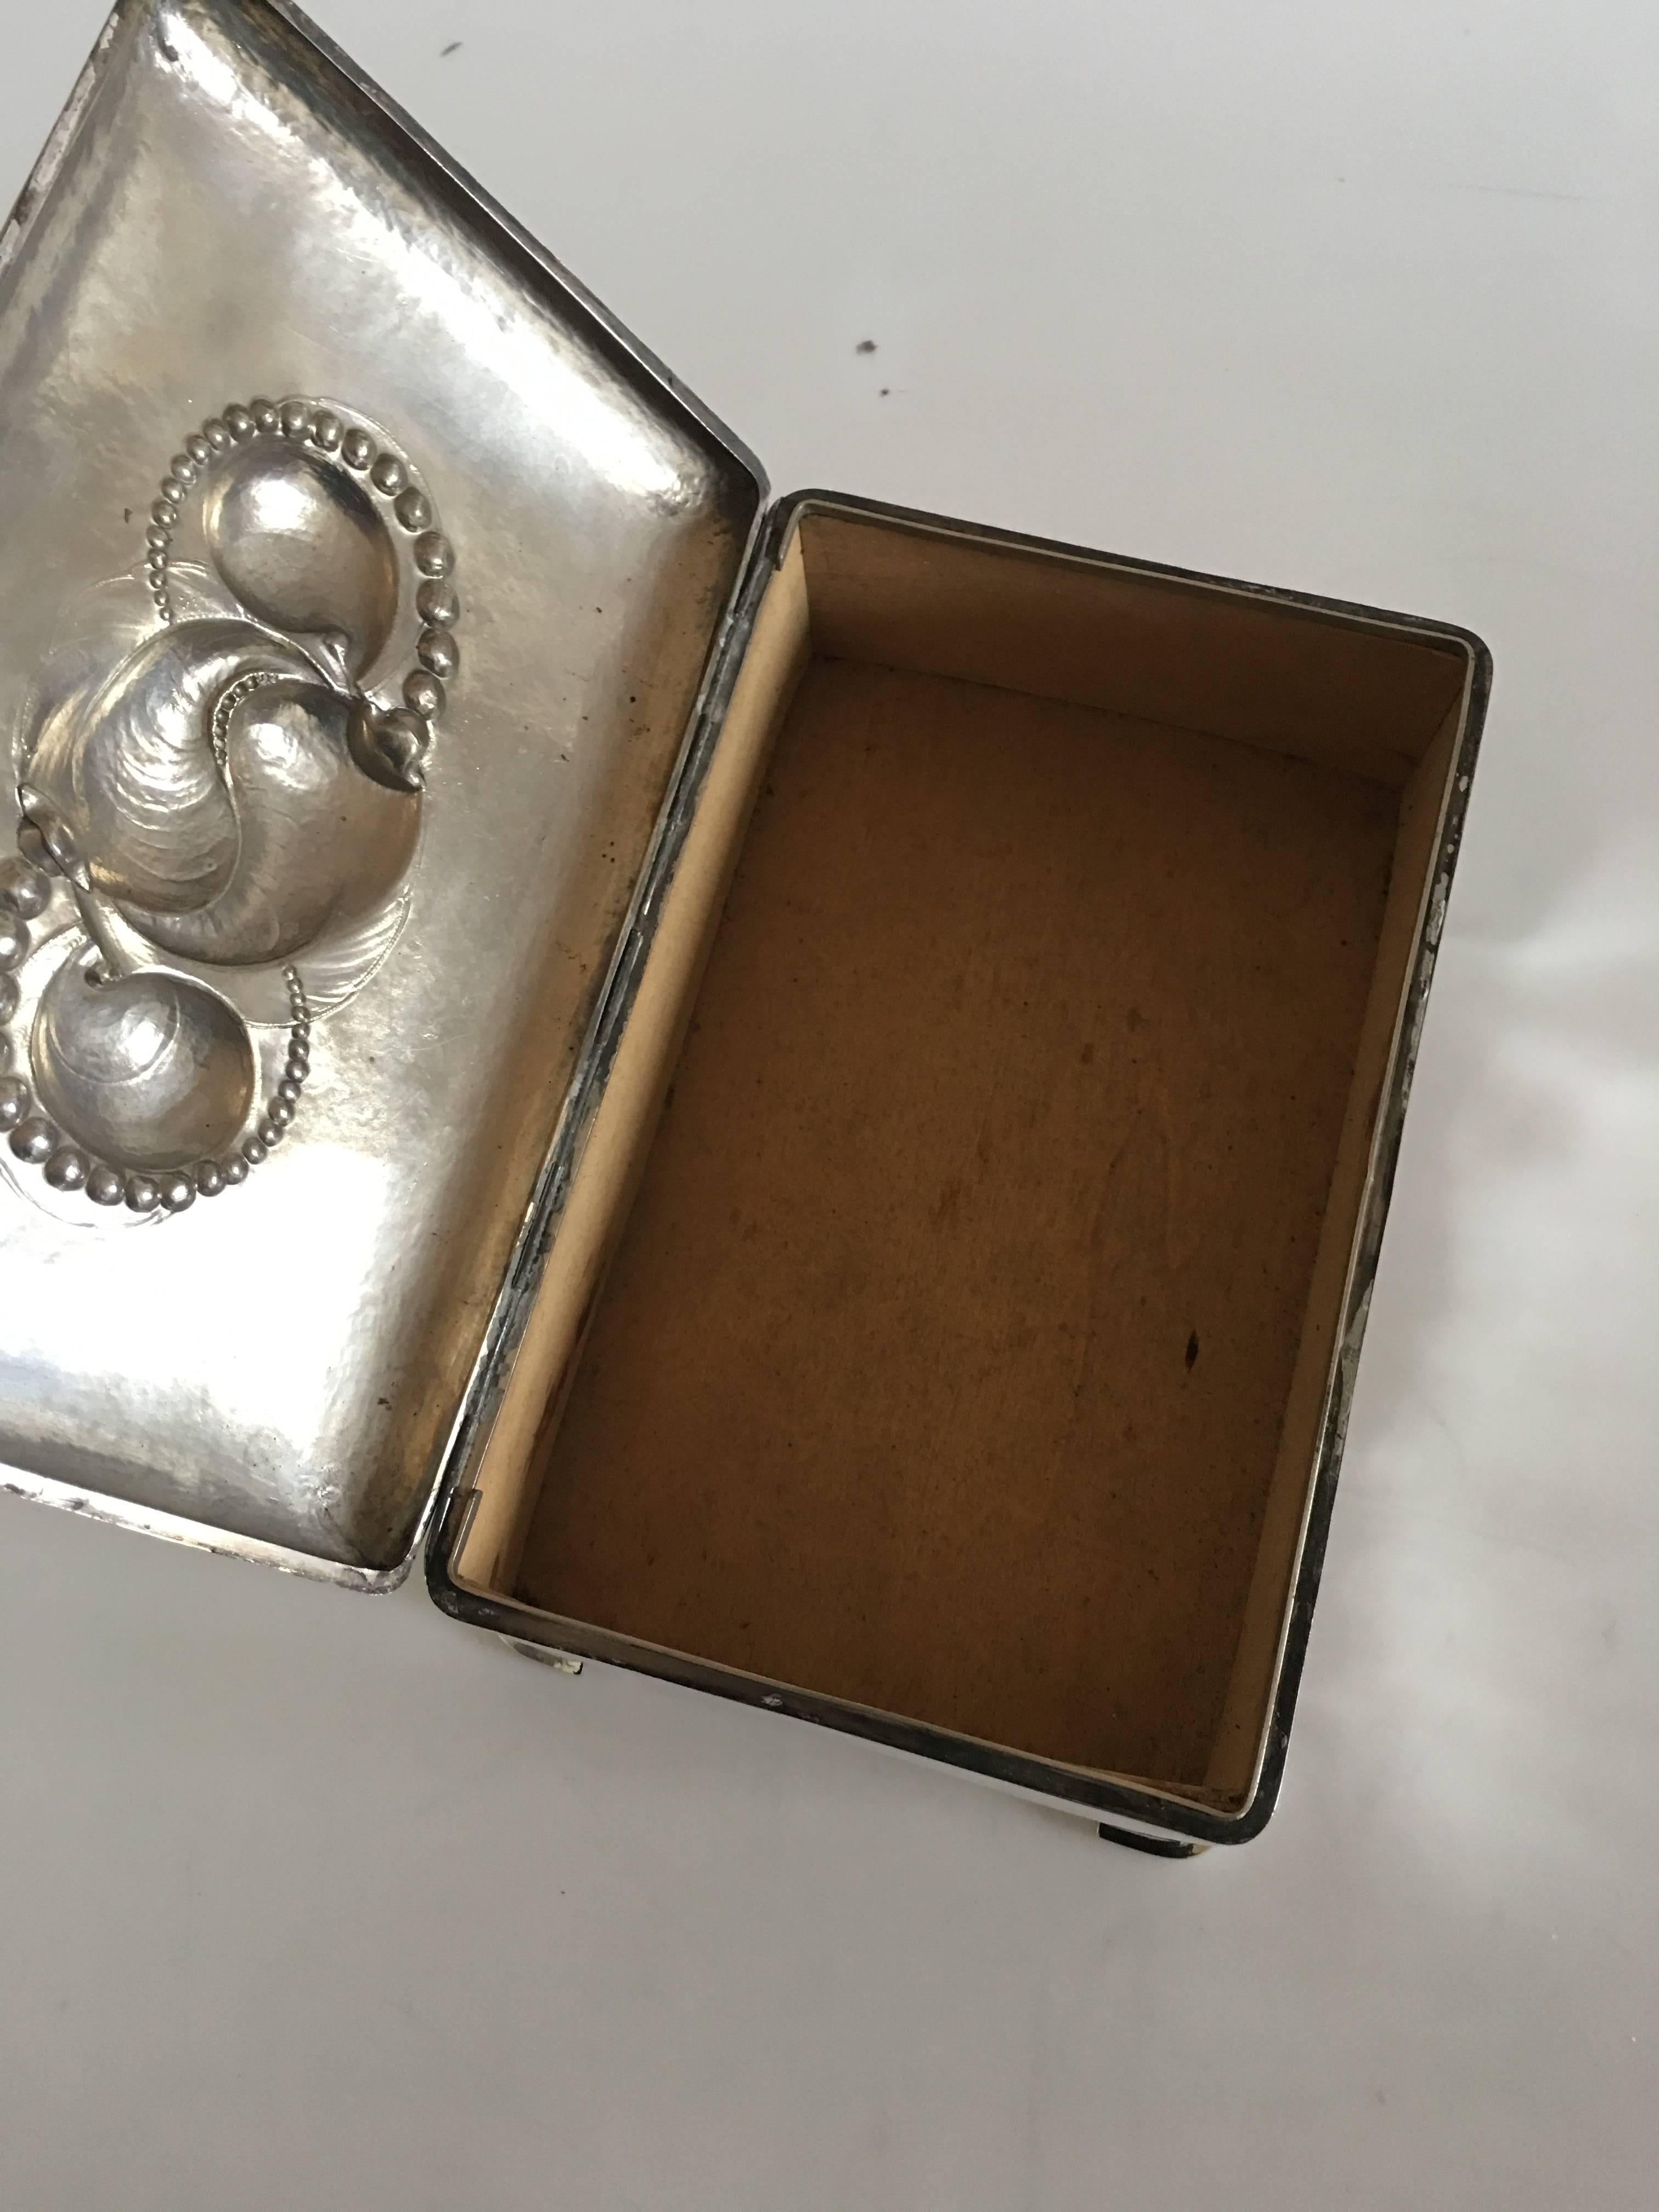 Large Evald Nielsen silver box. Silver ornament with shell forms and whole silver pearls. Measures 15 x 24.5 cm (5 29/32